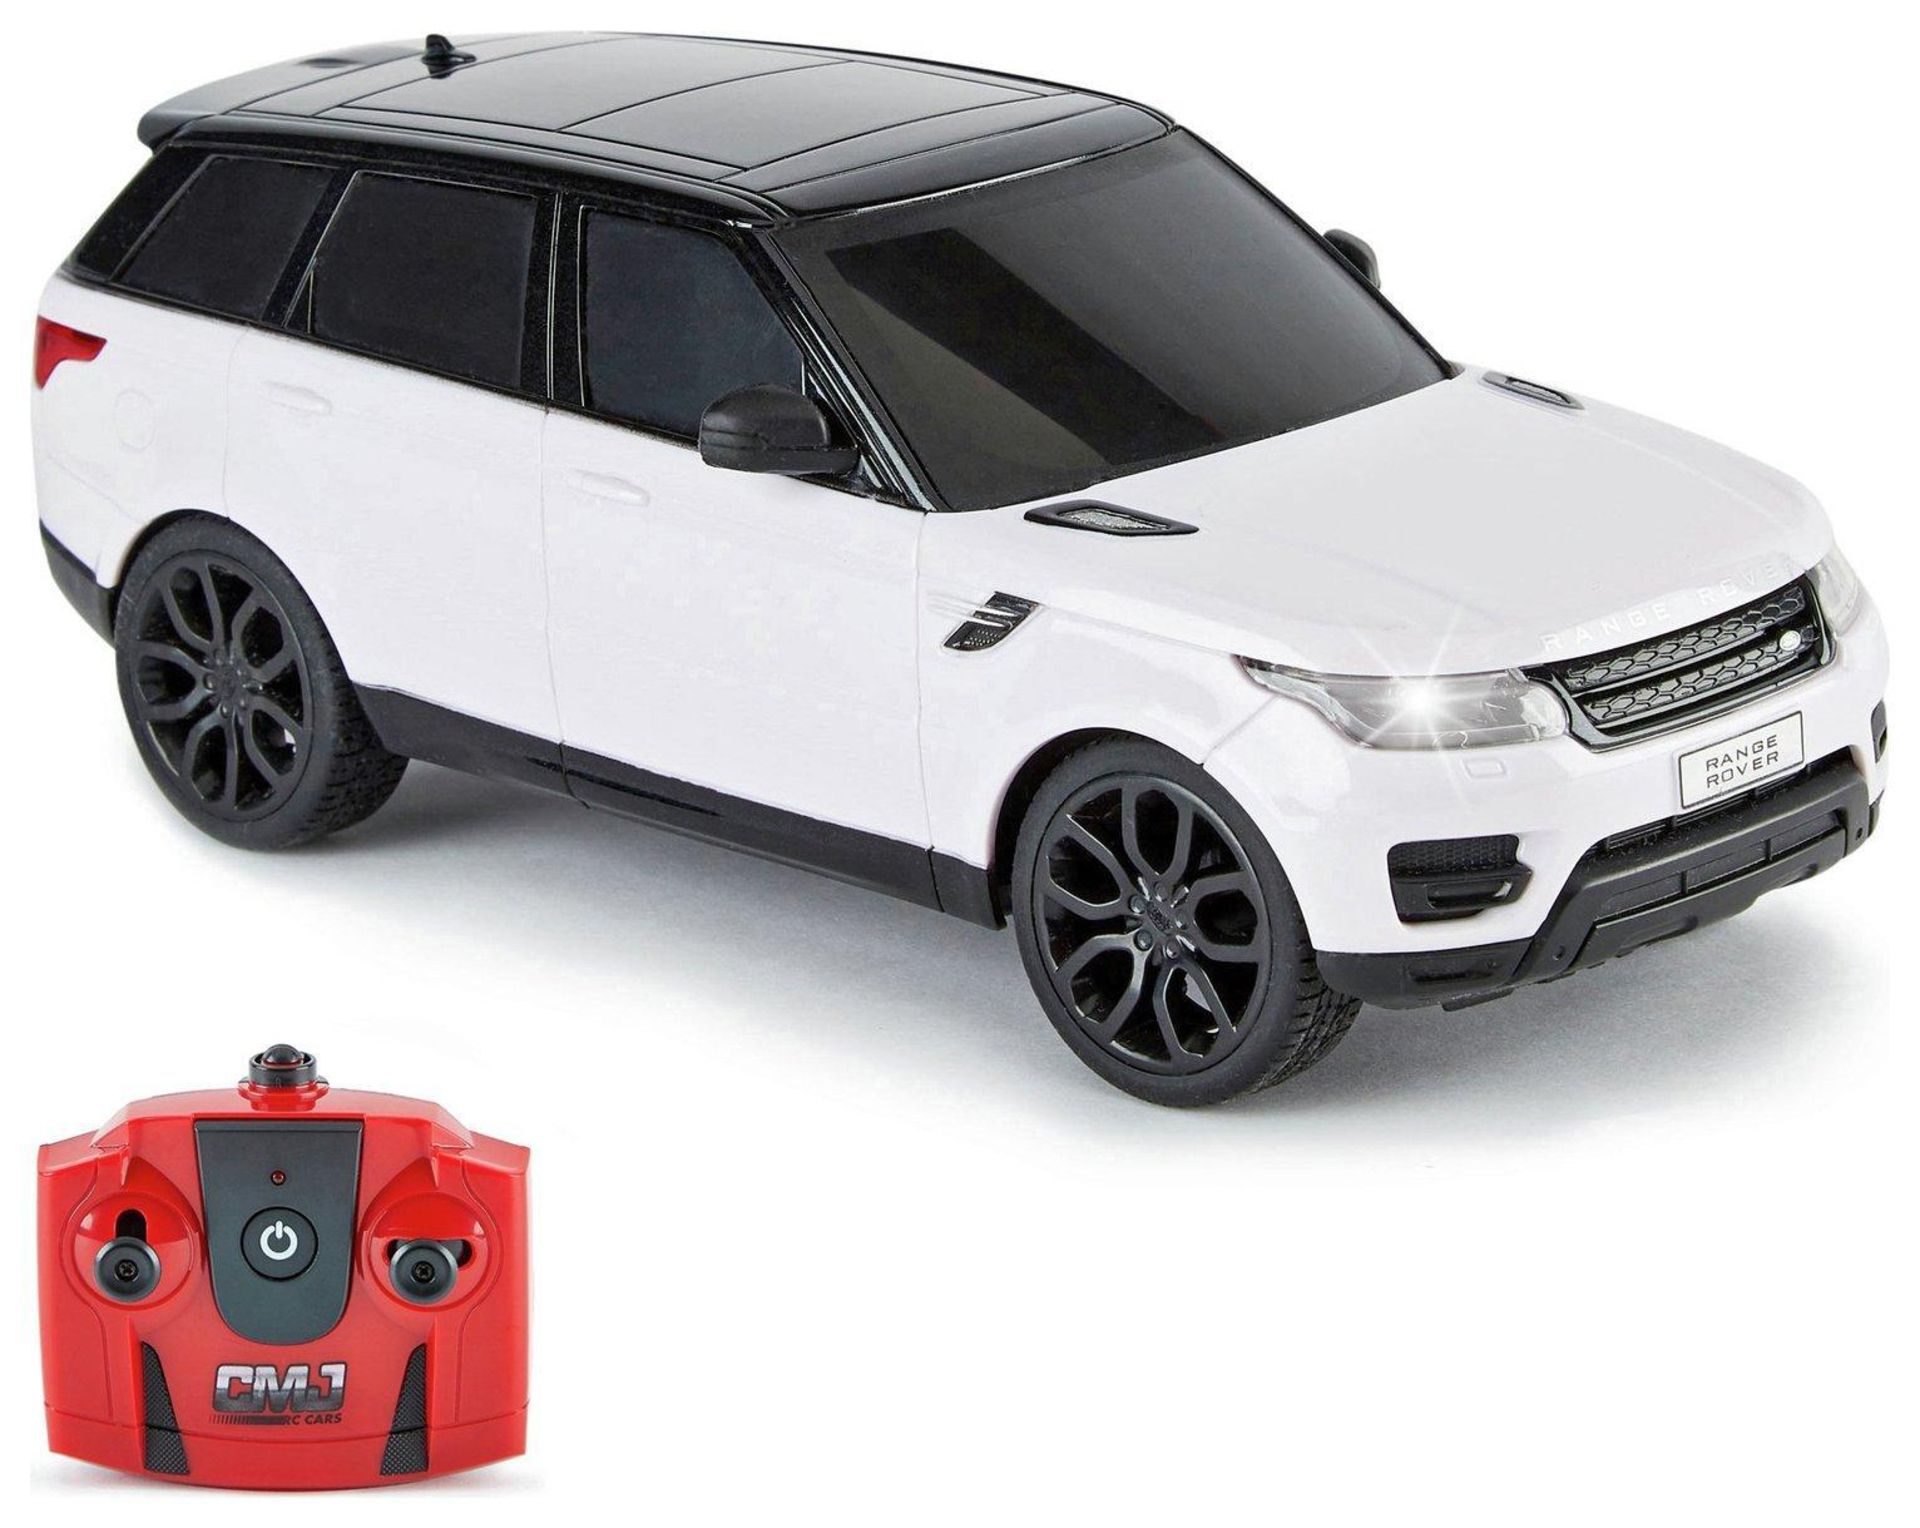 Radio Controlled Range Rover 1:24 Scale - White 2.4GHZ, £11.00 RRP